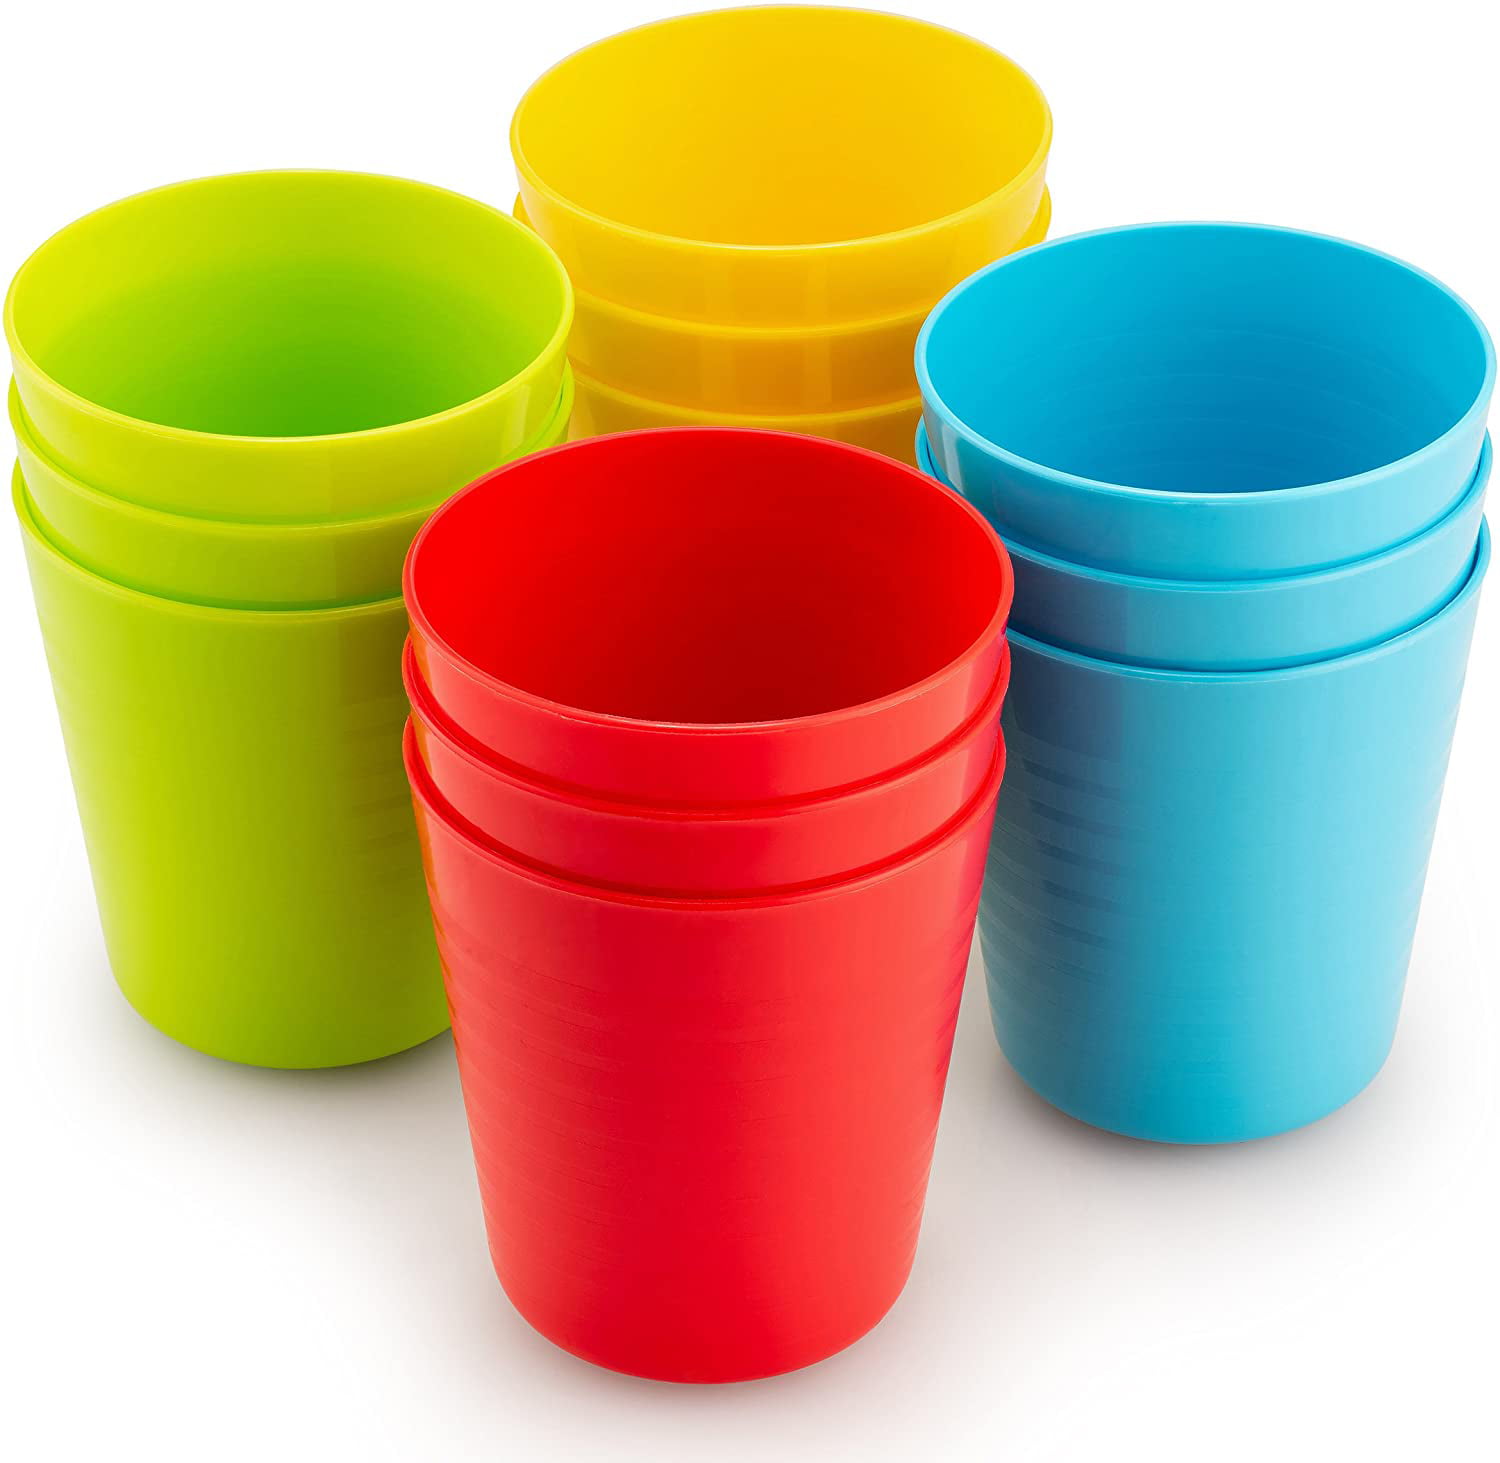  Eccliy Toddler Cups Kids Cups 8 oz Plastic Cups Reusable Cups  Unbreakable Plastic Drinking Cups Tumblers for Kids Baby Toddlers,  Dishwasher Safe, 6 Colors (36 Pcs) : Toys & Games